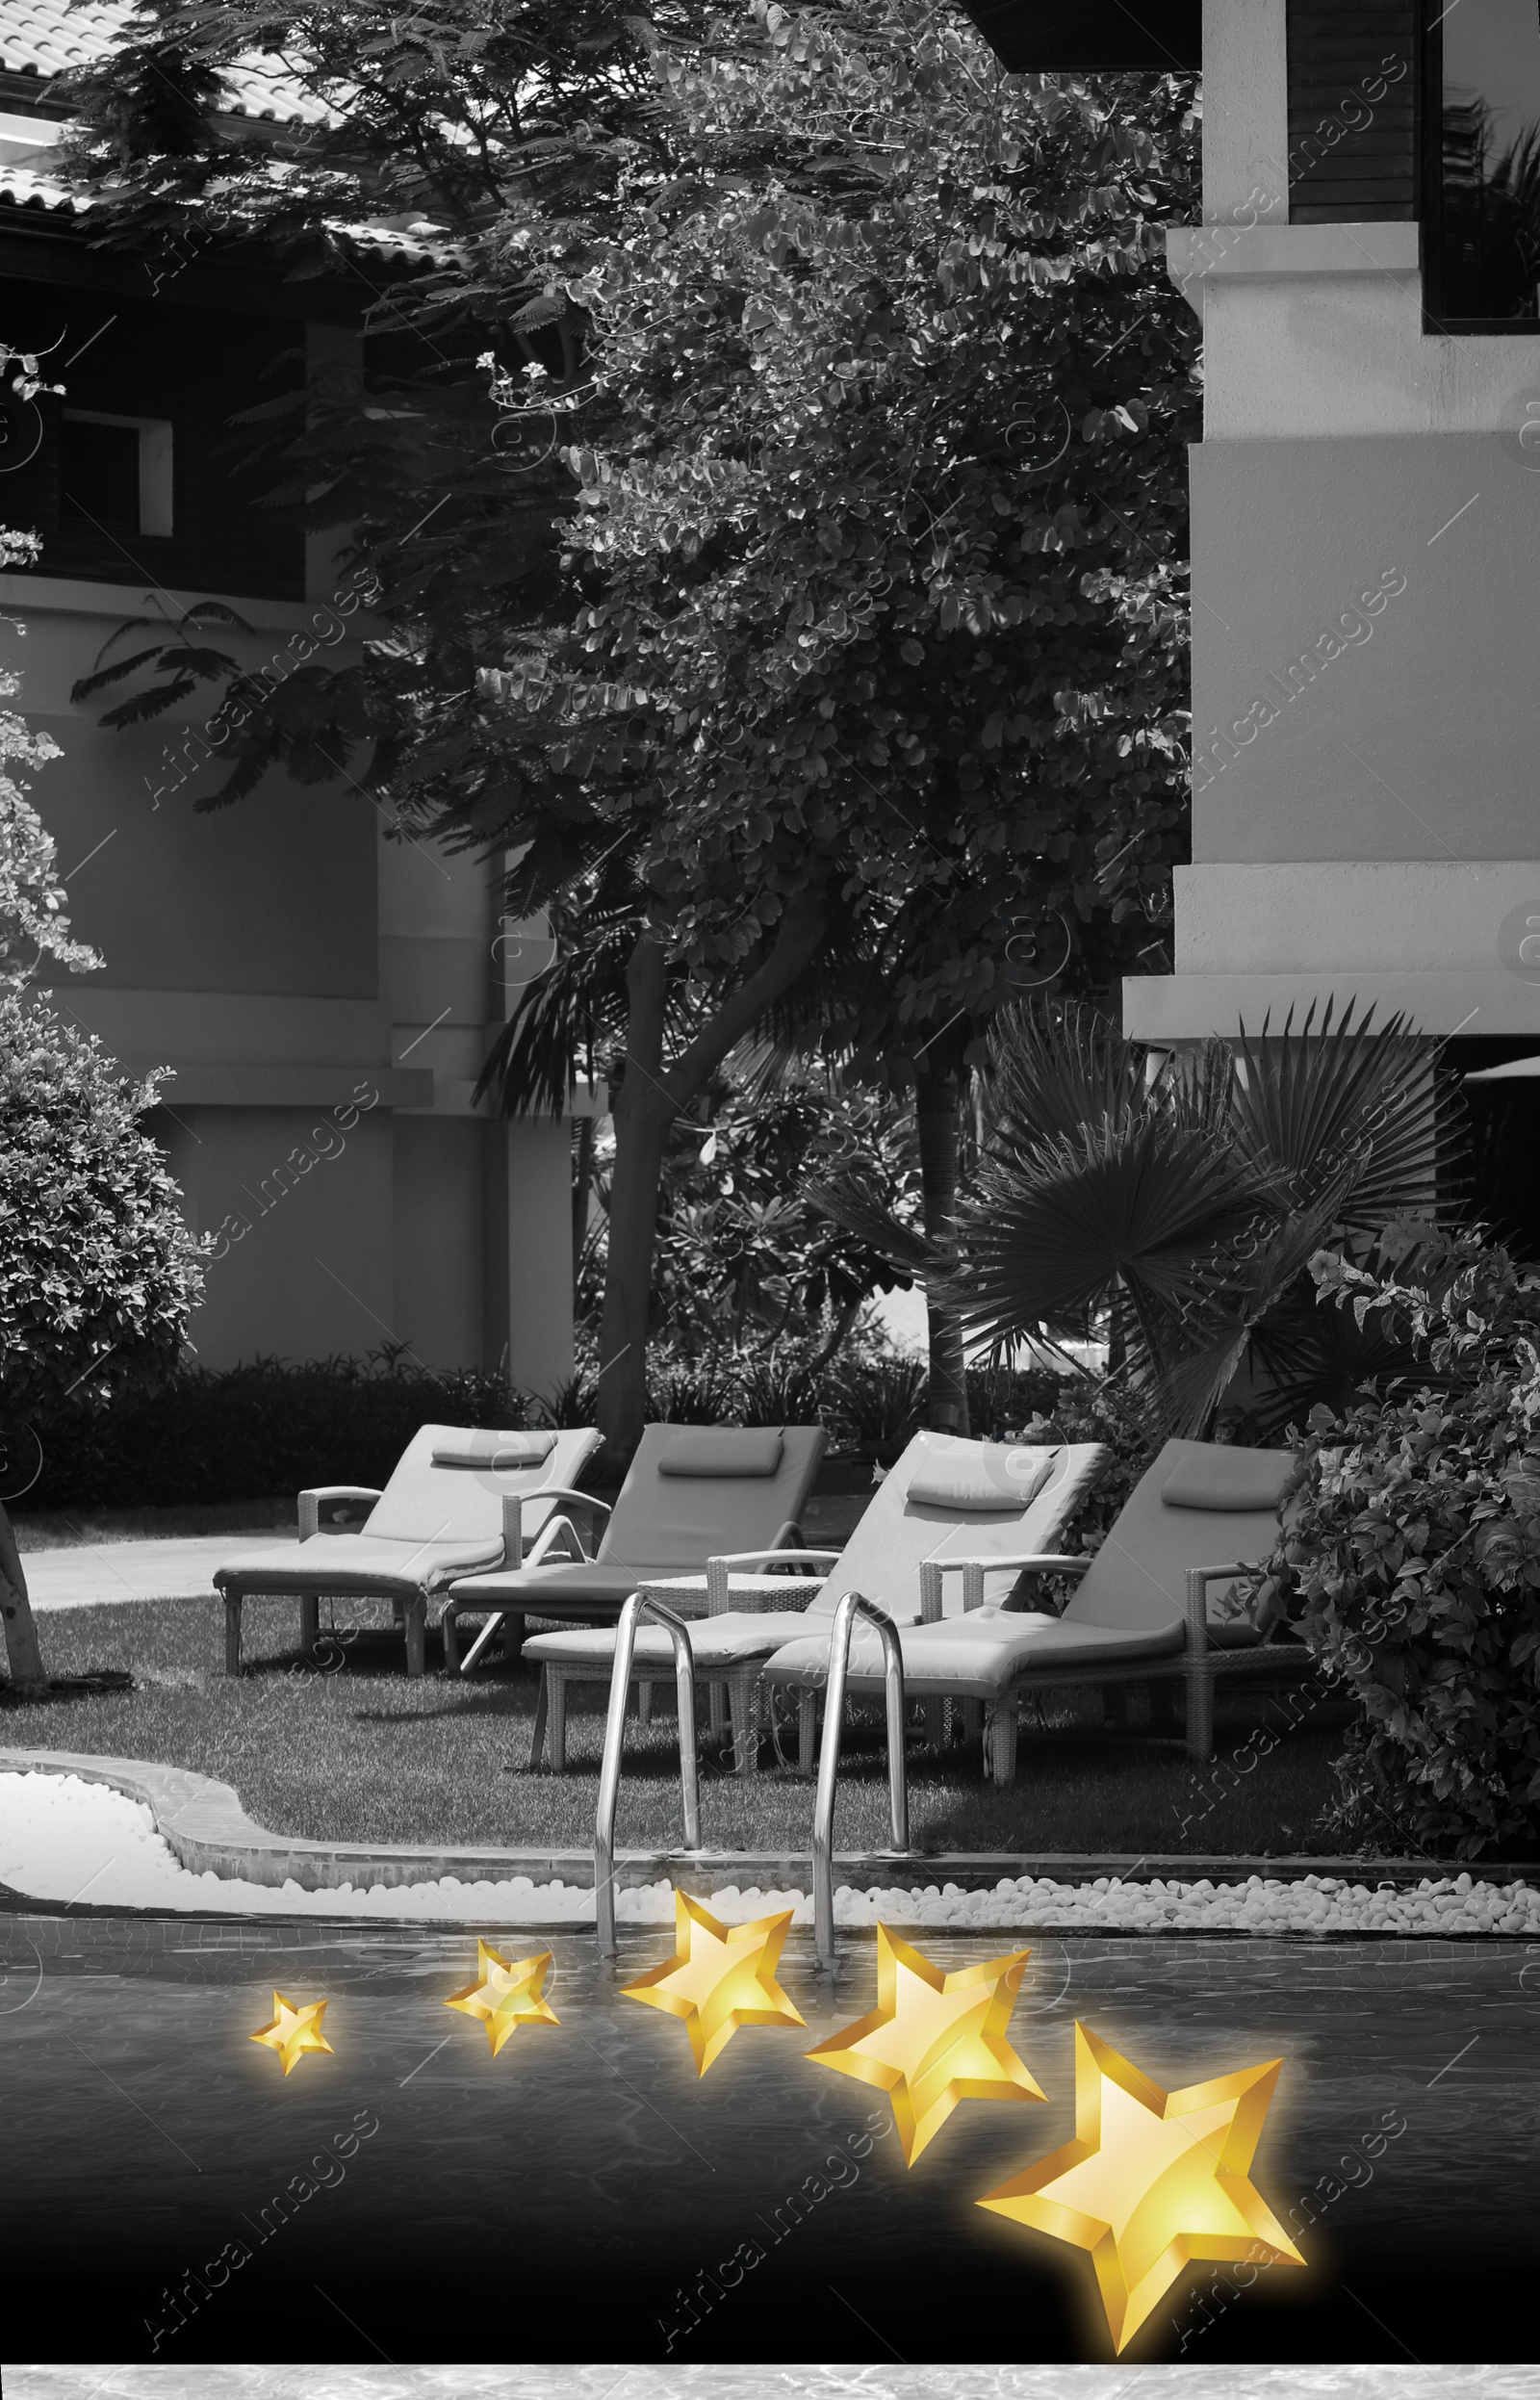 Image of Sunbeds near swimming pool at five star hotel. Black and white tone